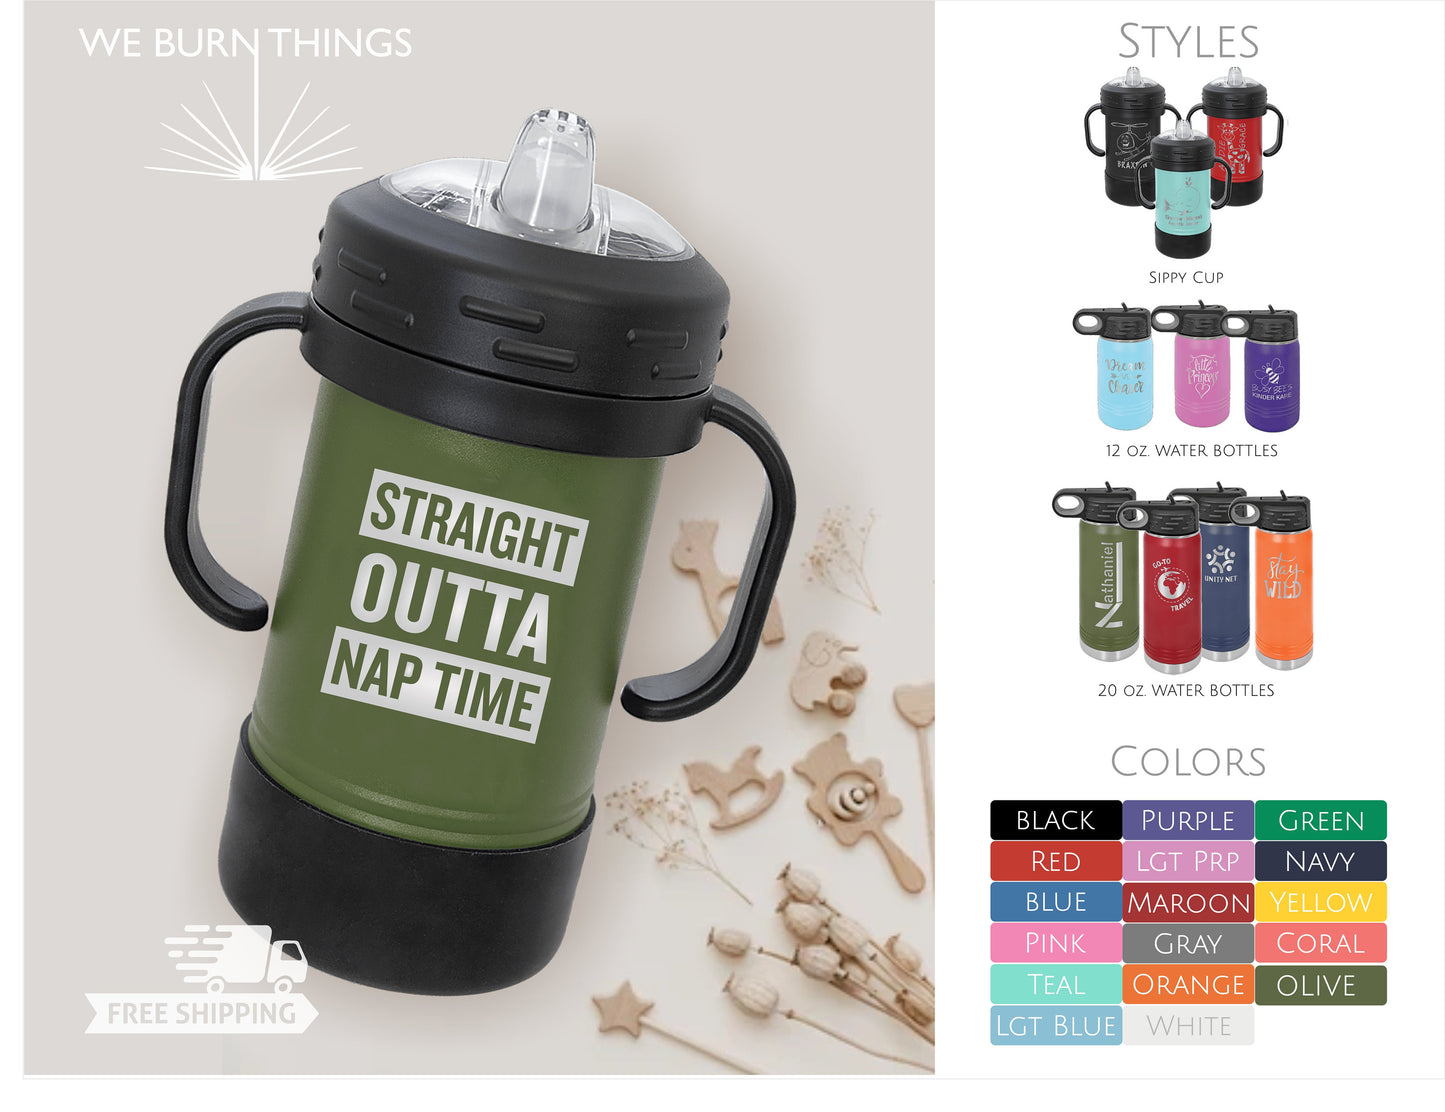 Straight Outta Nap Time - BABY & KID DRINKWARE: *Free Shipping